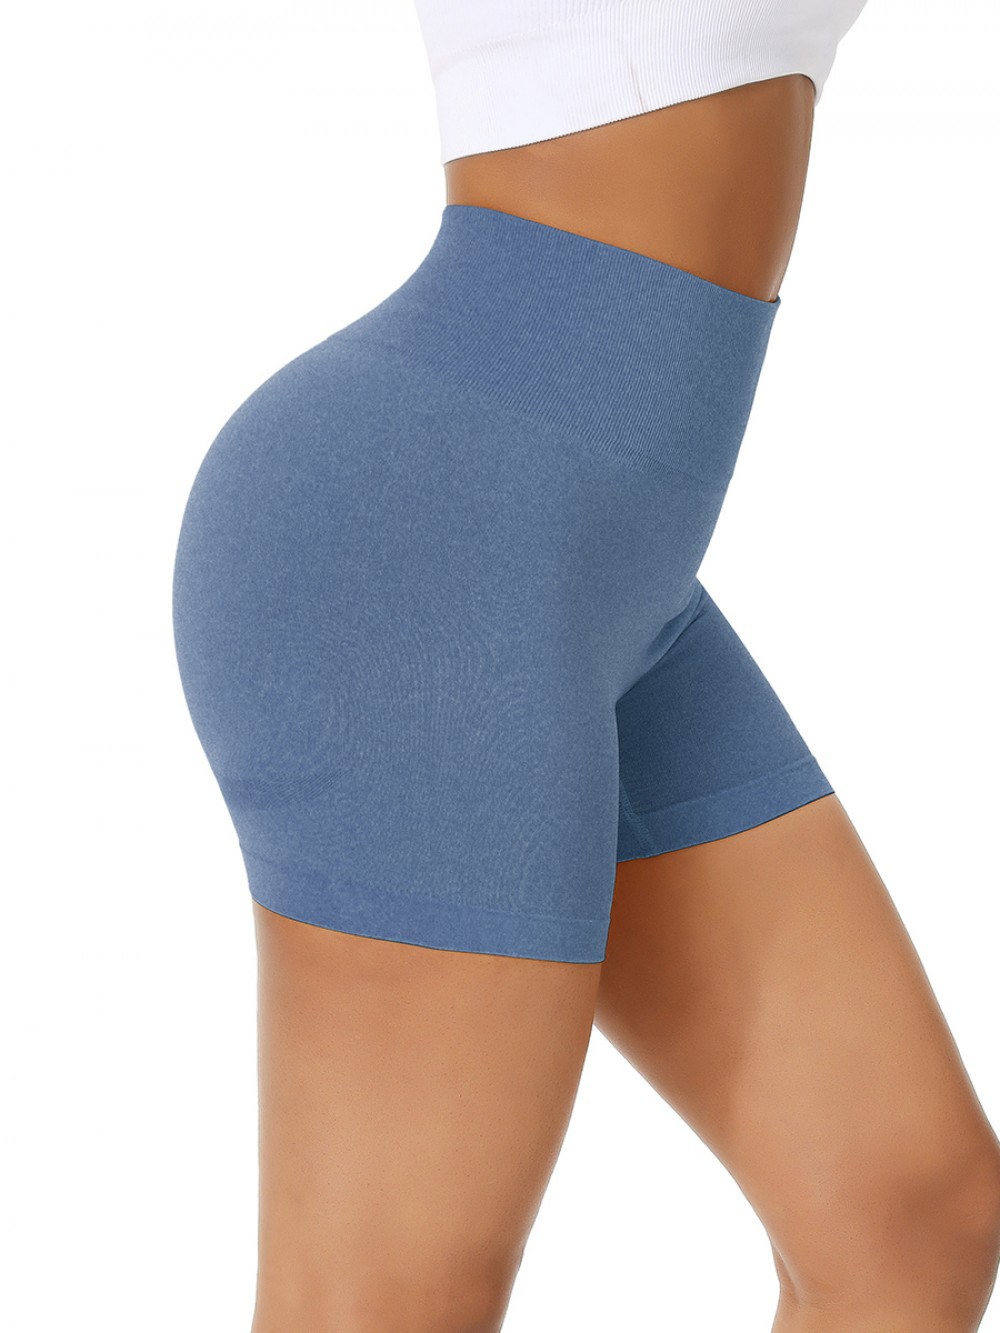 Blue Slim Sports Shorts Thigh Length Solid Color Workout Apparel